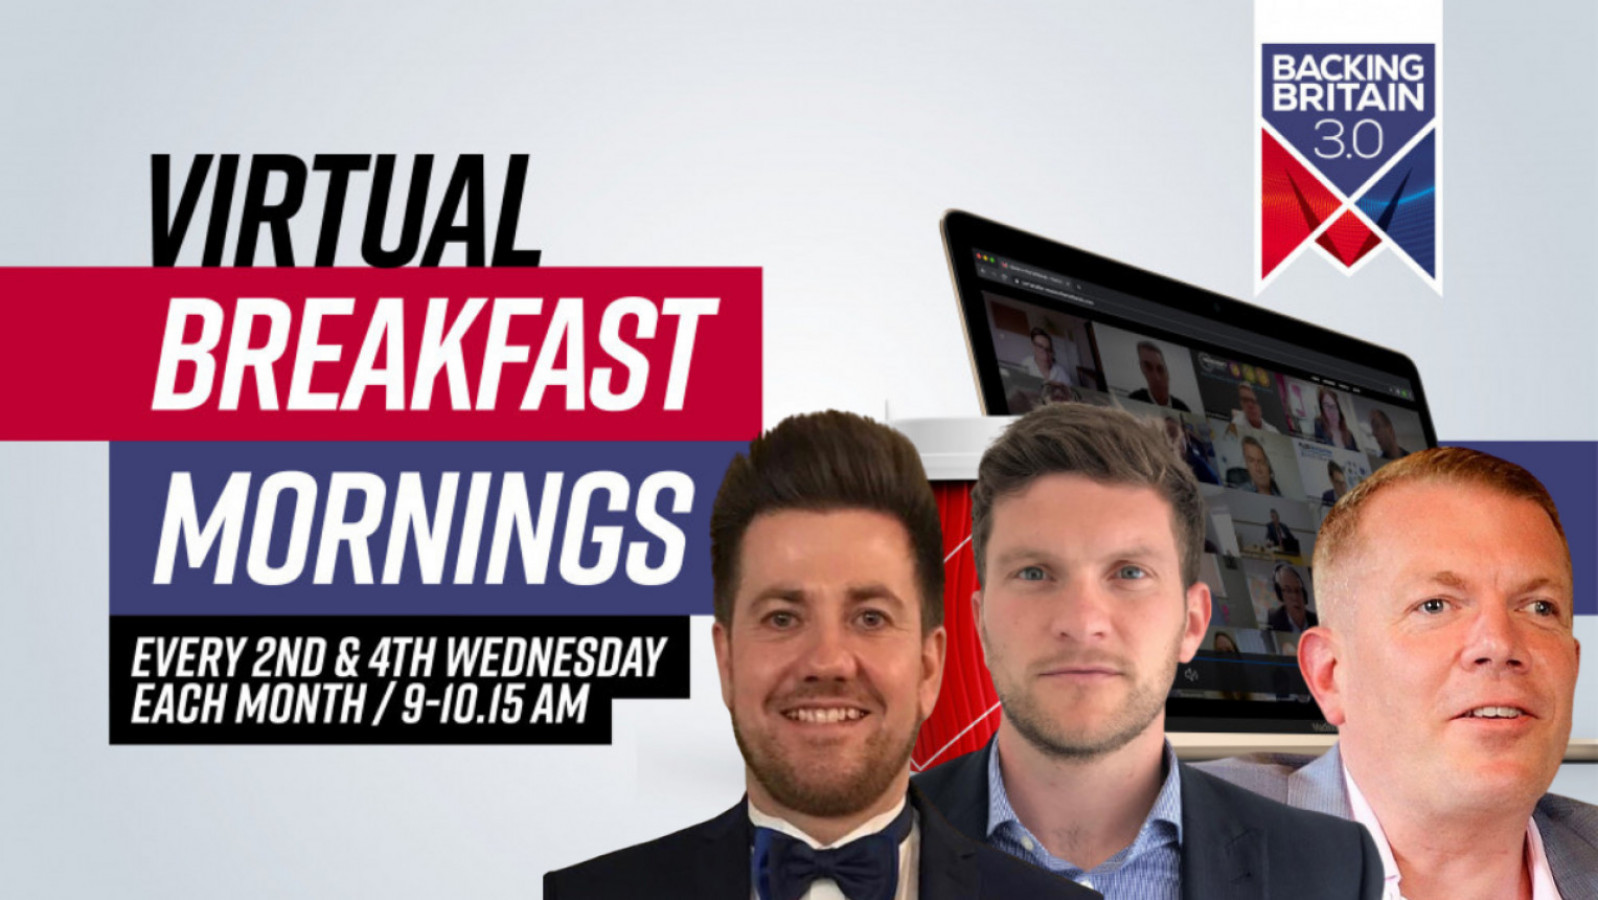 Backing Britain Virtual Breakfast Morning with Ram...